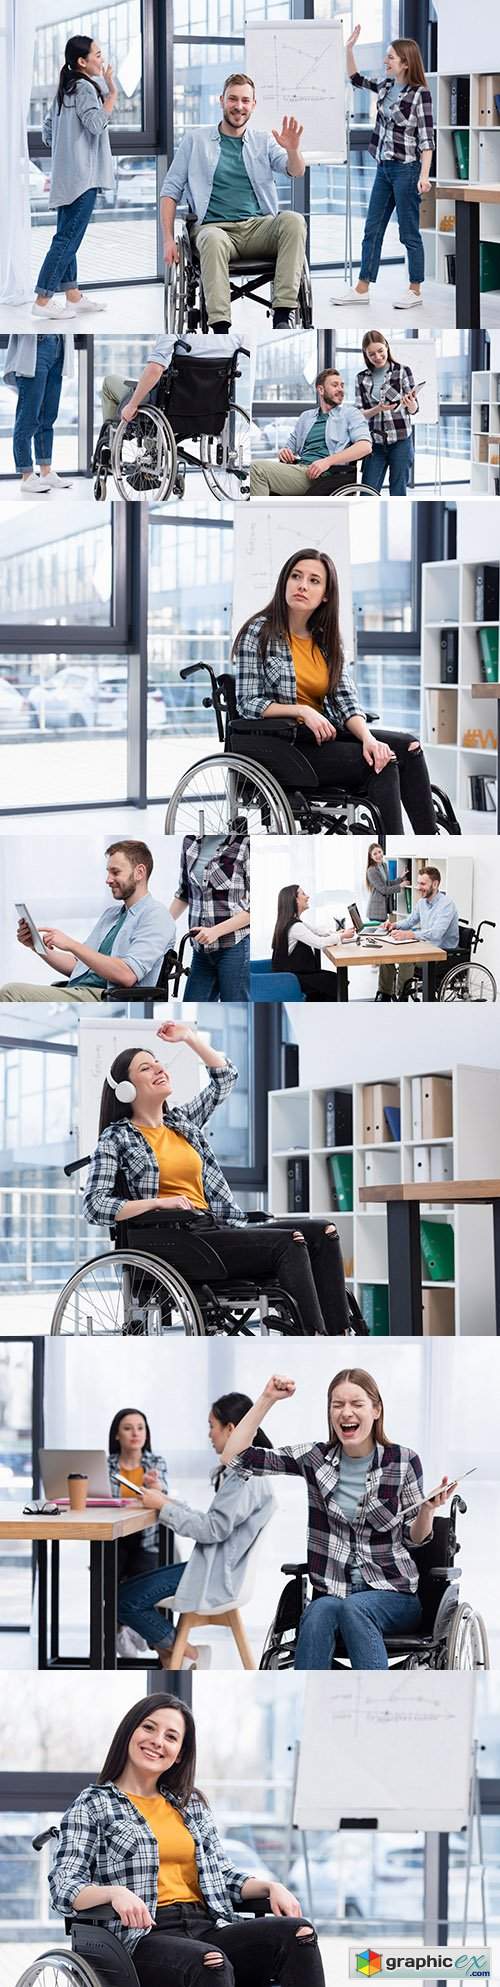  Business people with disabilities at work in office 